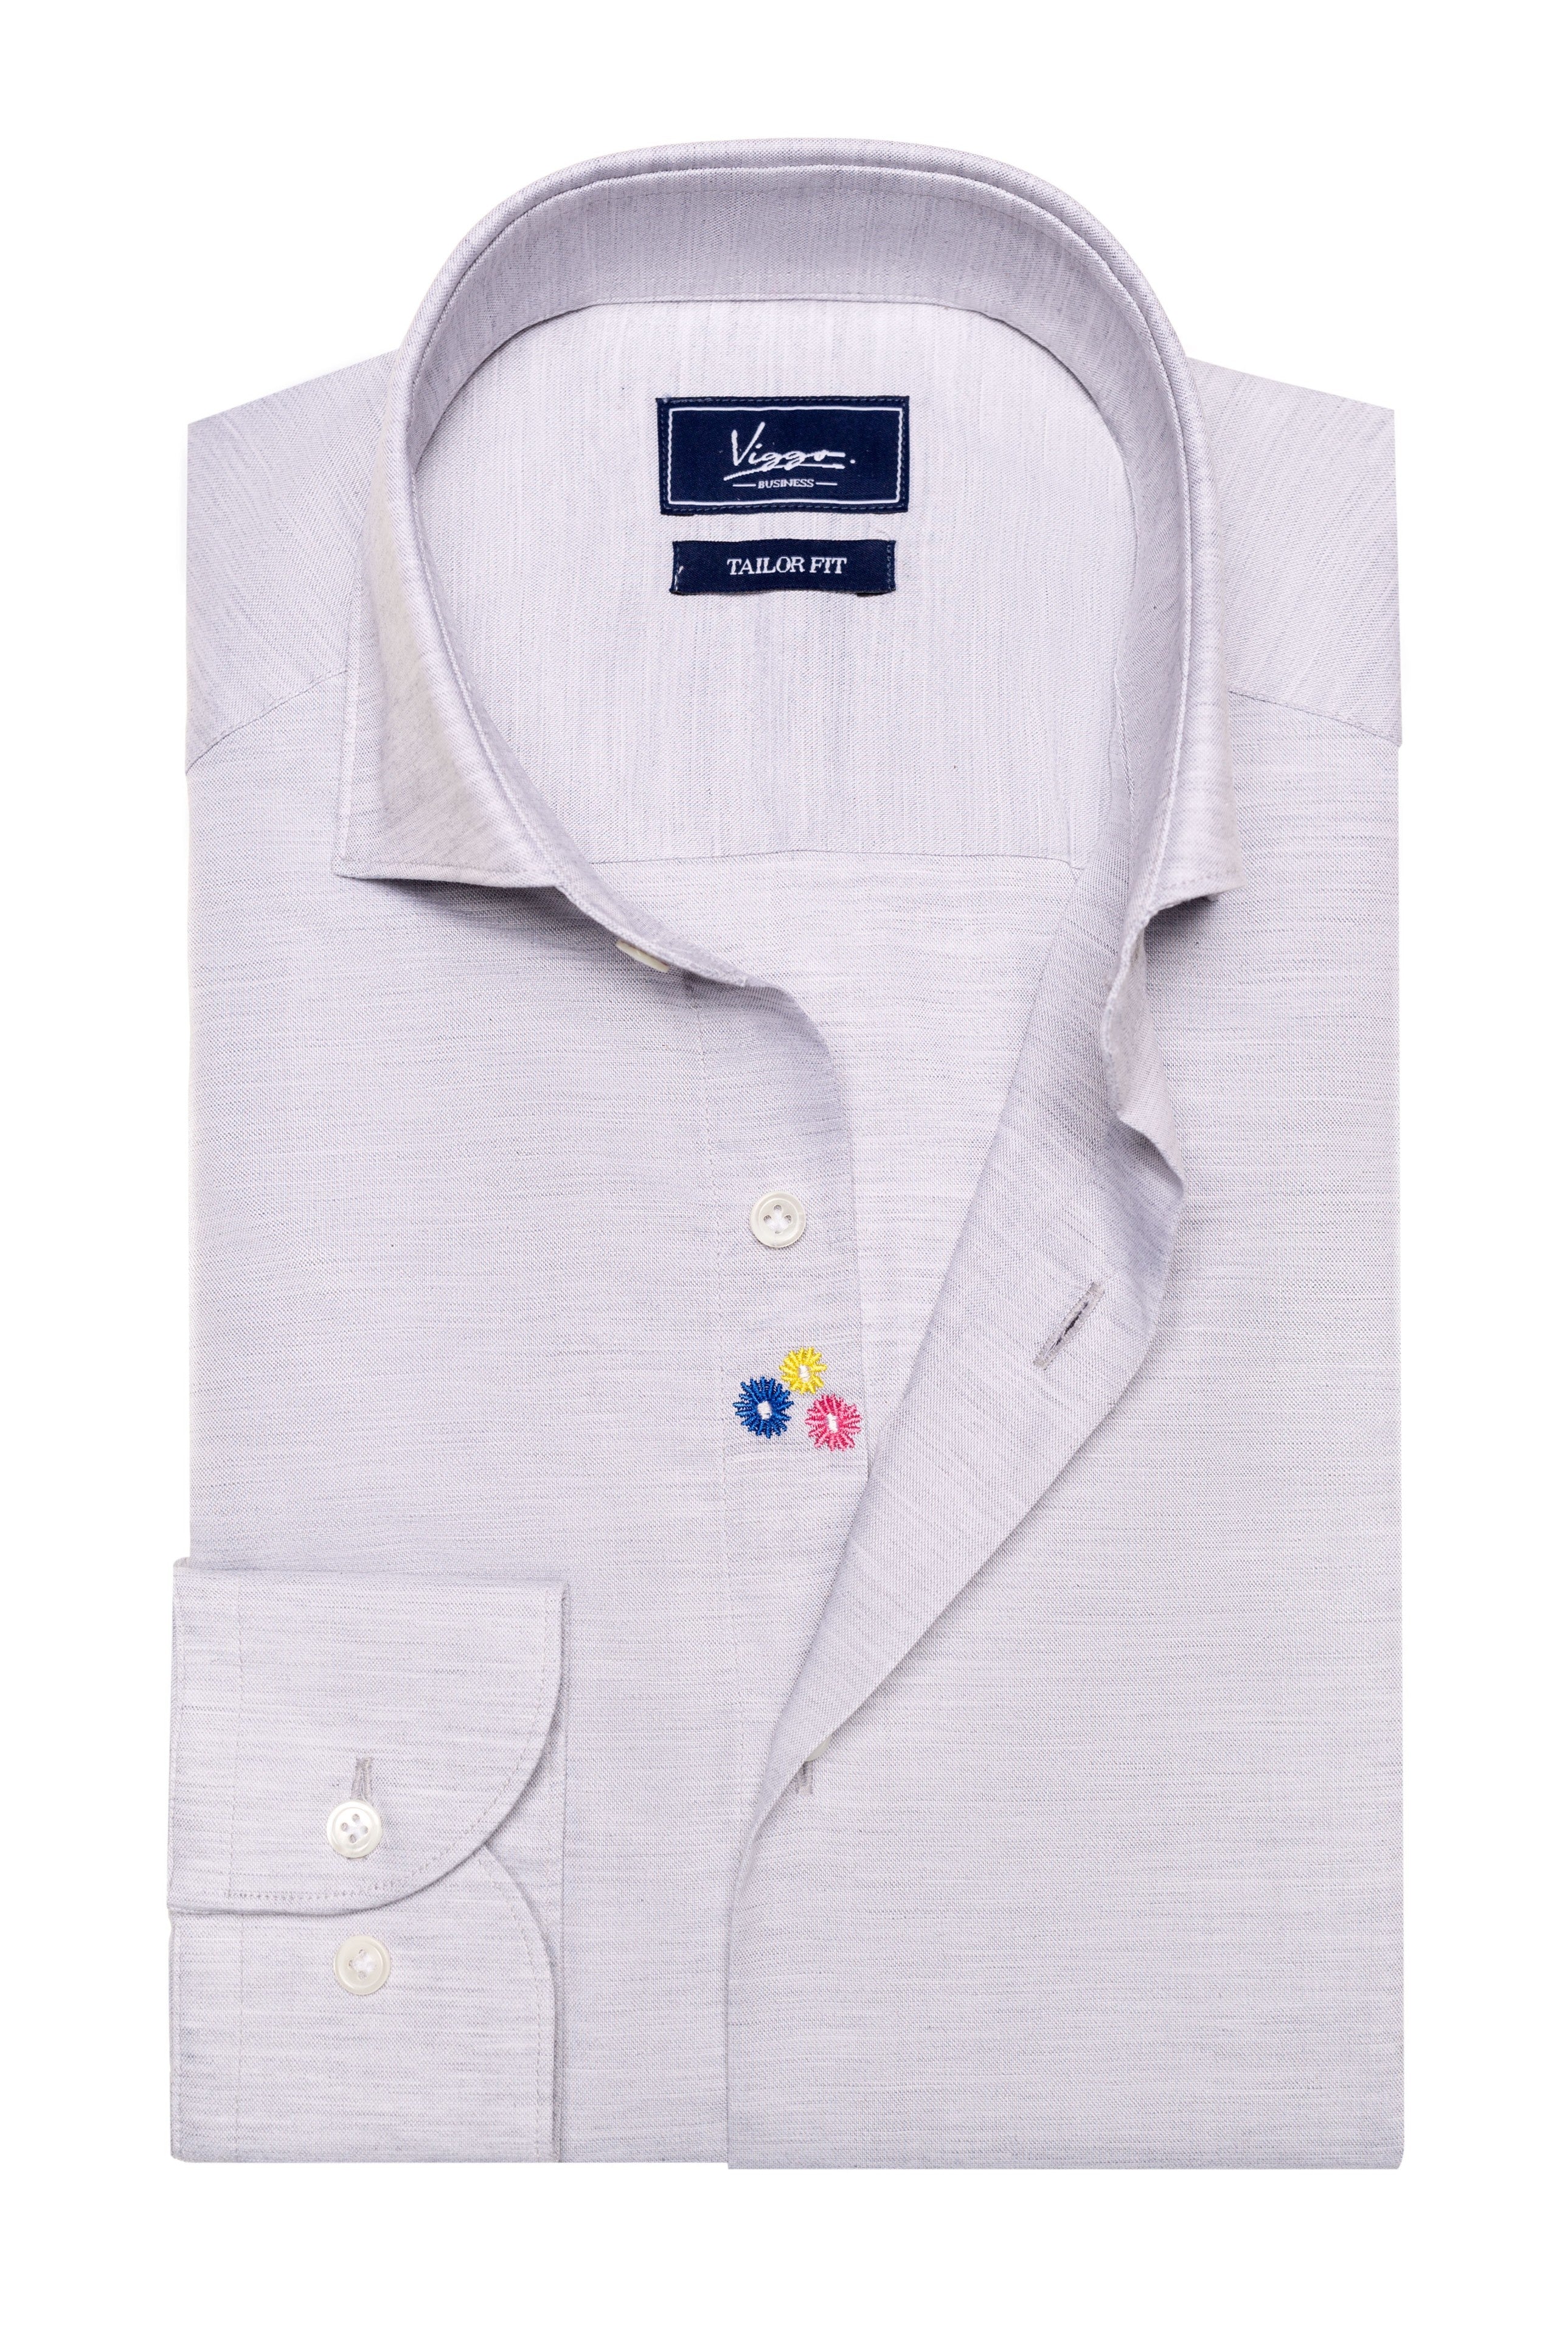 Gray Shirt With Multicolored Embroidery